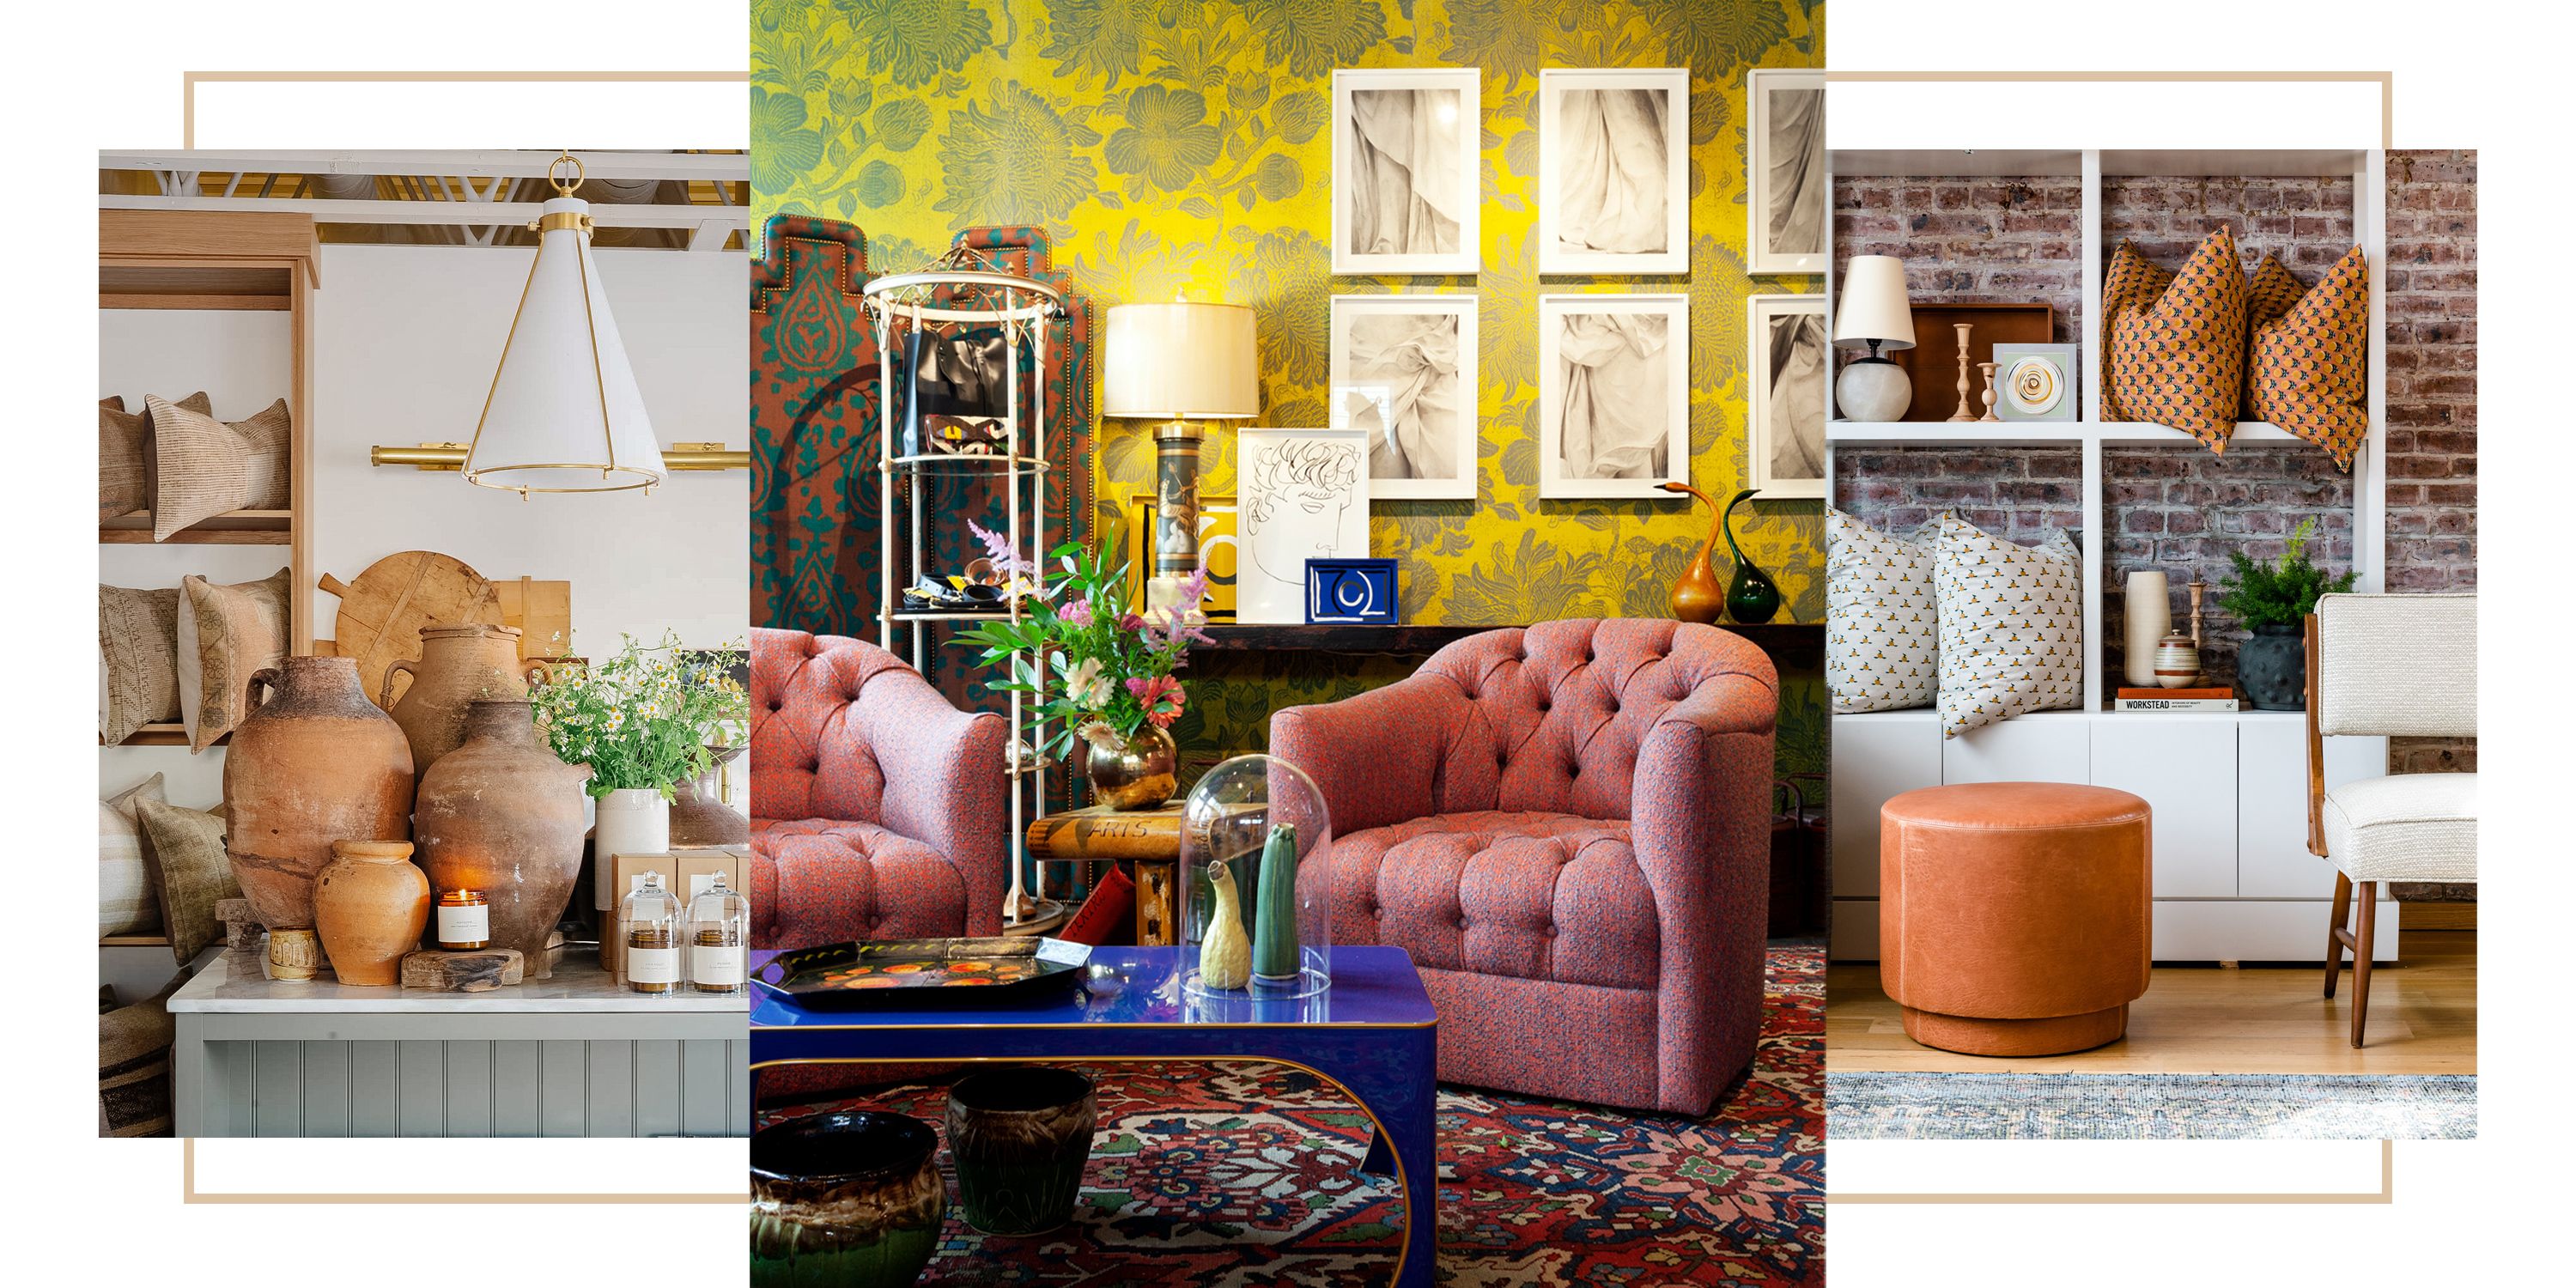 Are You Good At Home Decor Ideas Living Room? Here's A Quick Quiz To Find Out